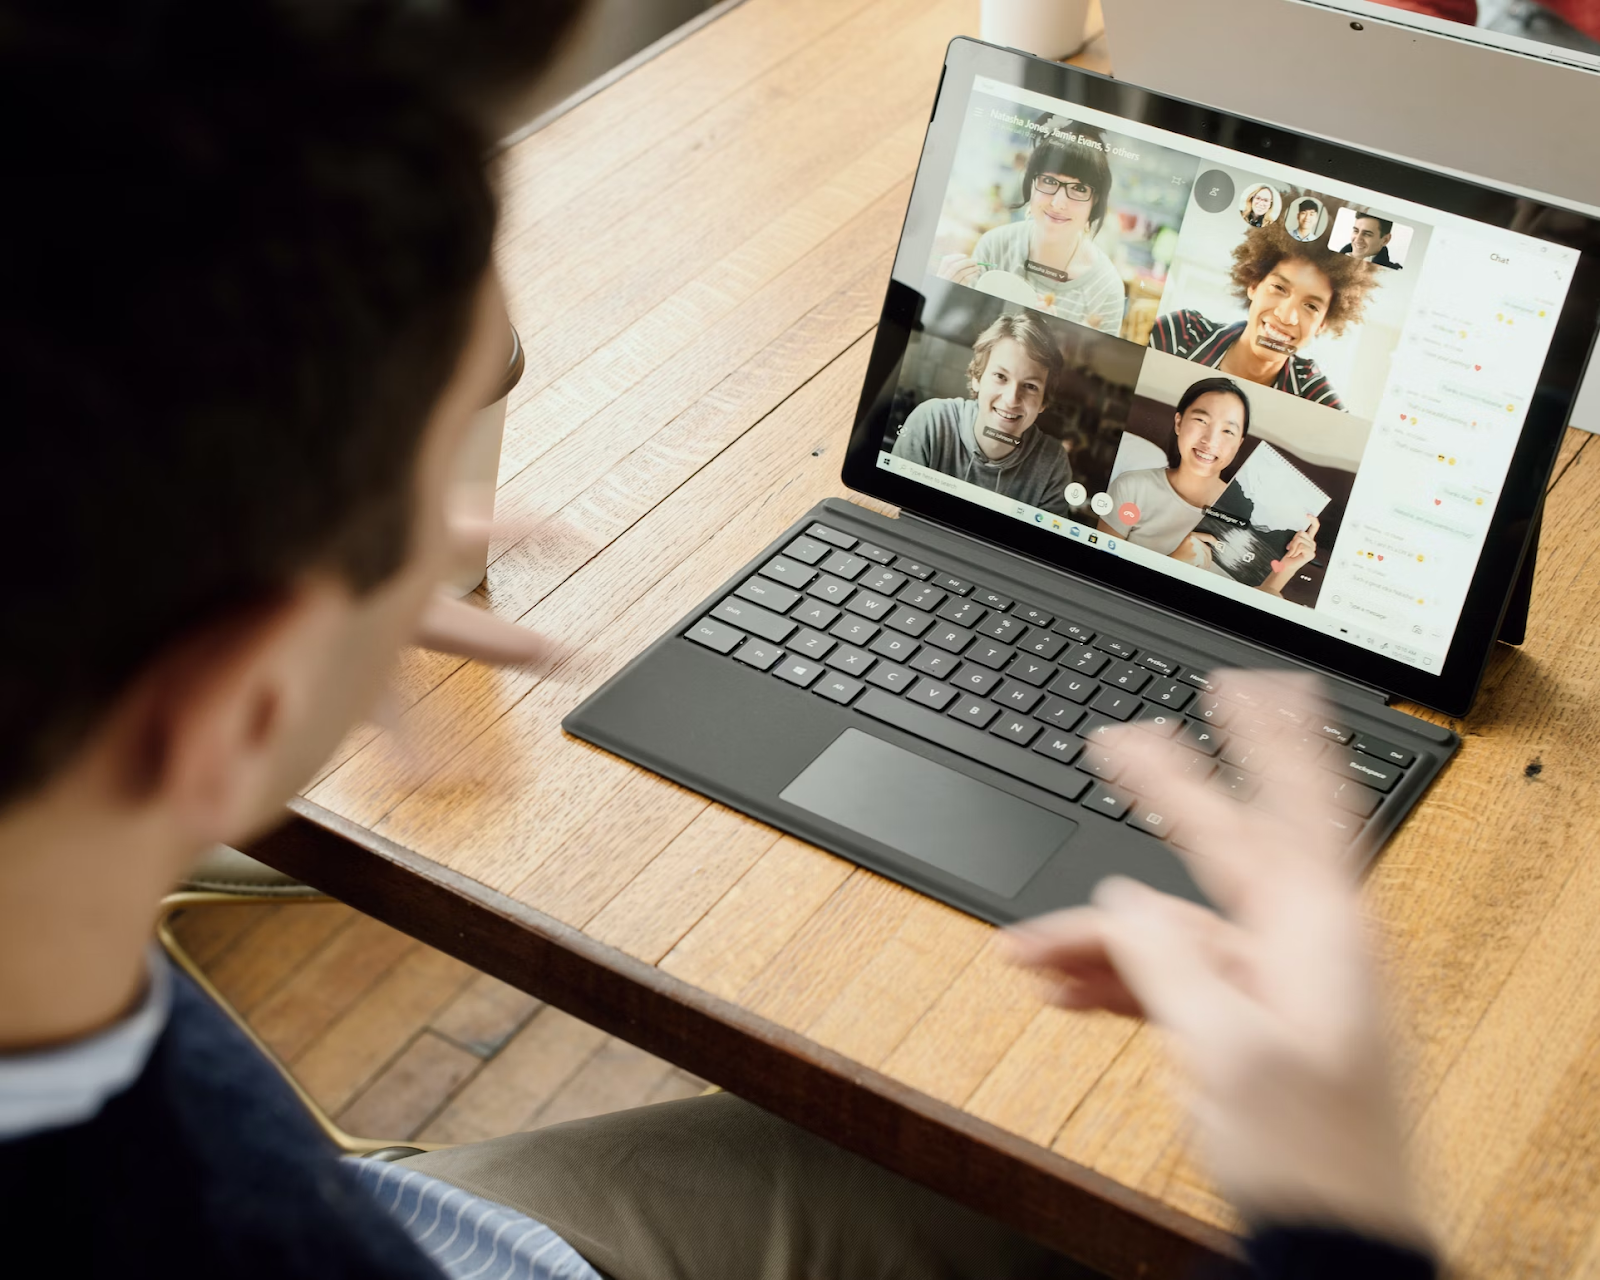 A group of people on a video call